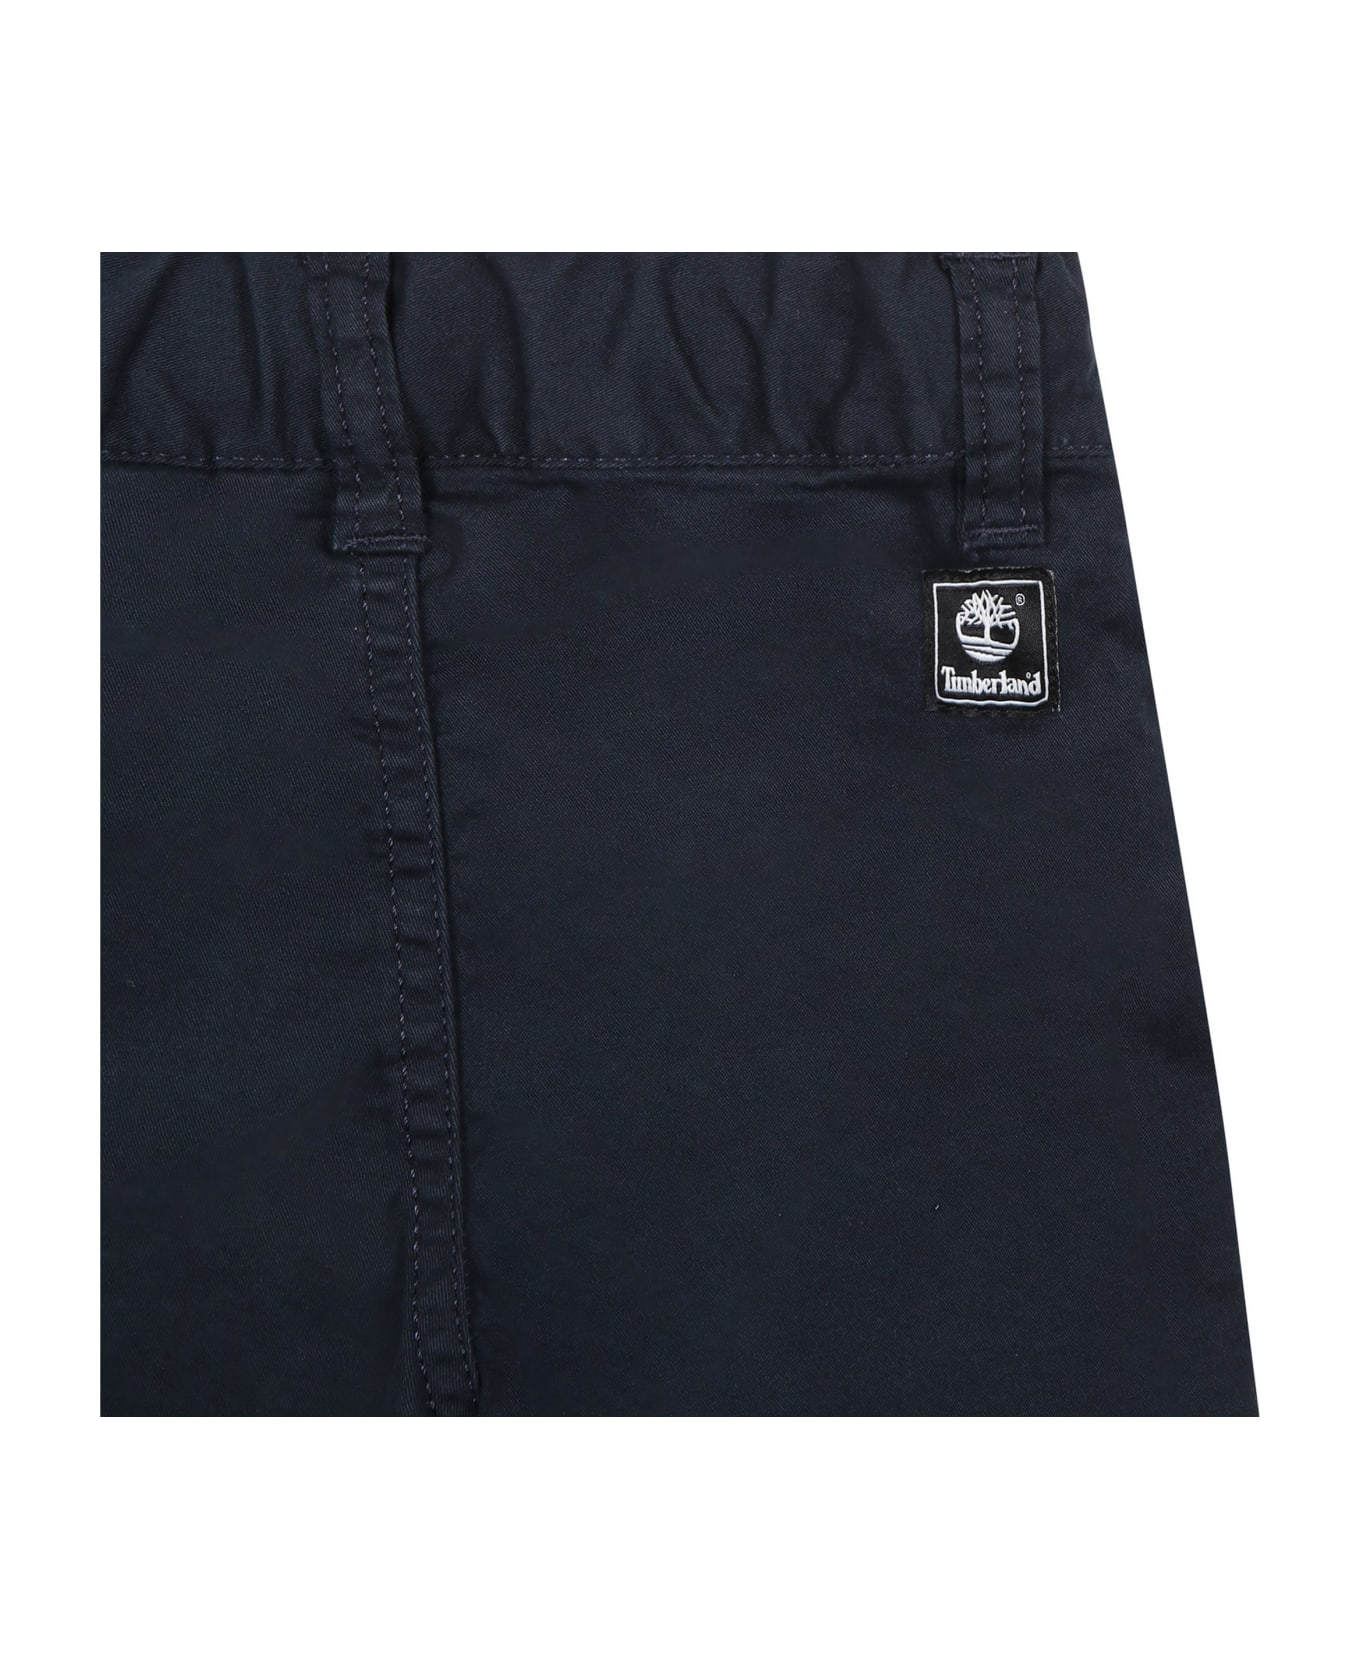 Timberland Blue Casual Shorts For Baby Boy - Blue ボトムス